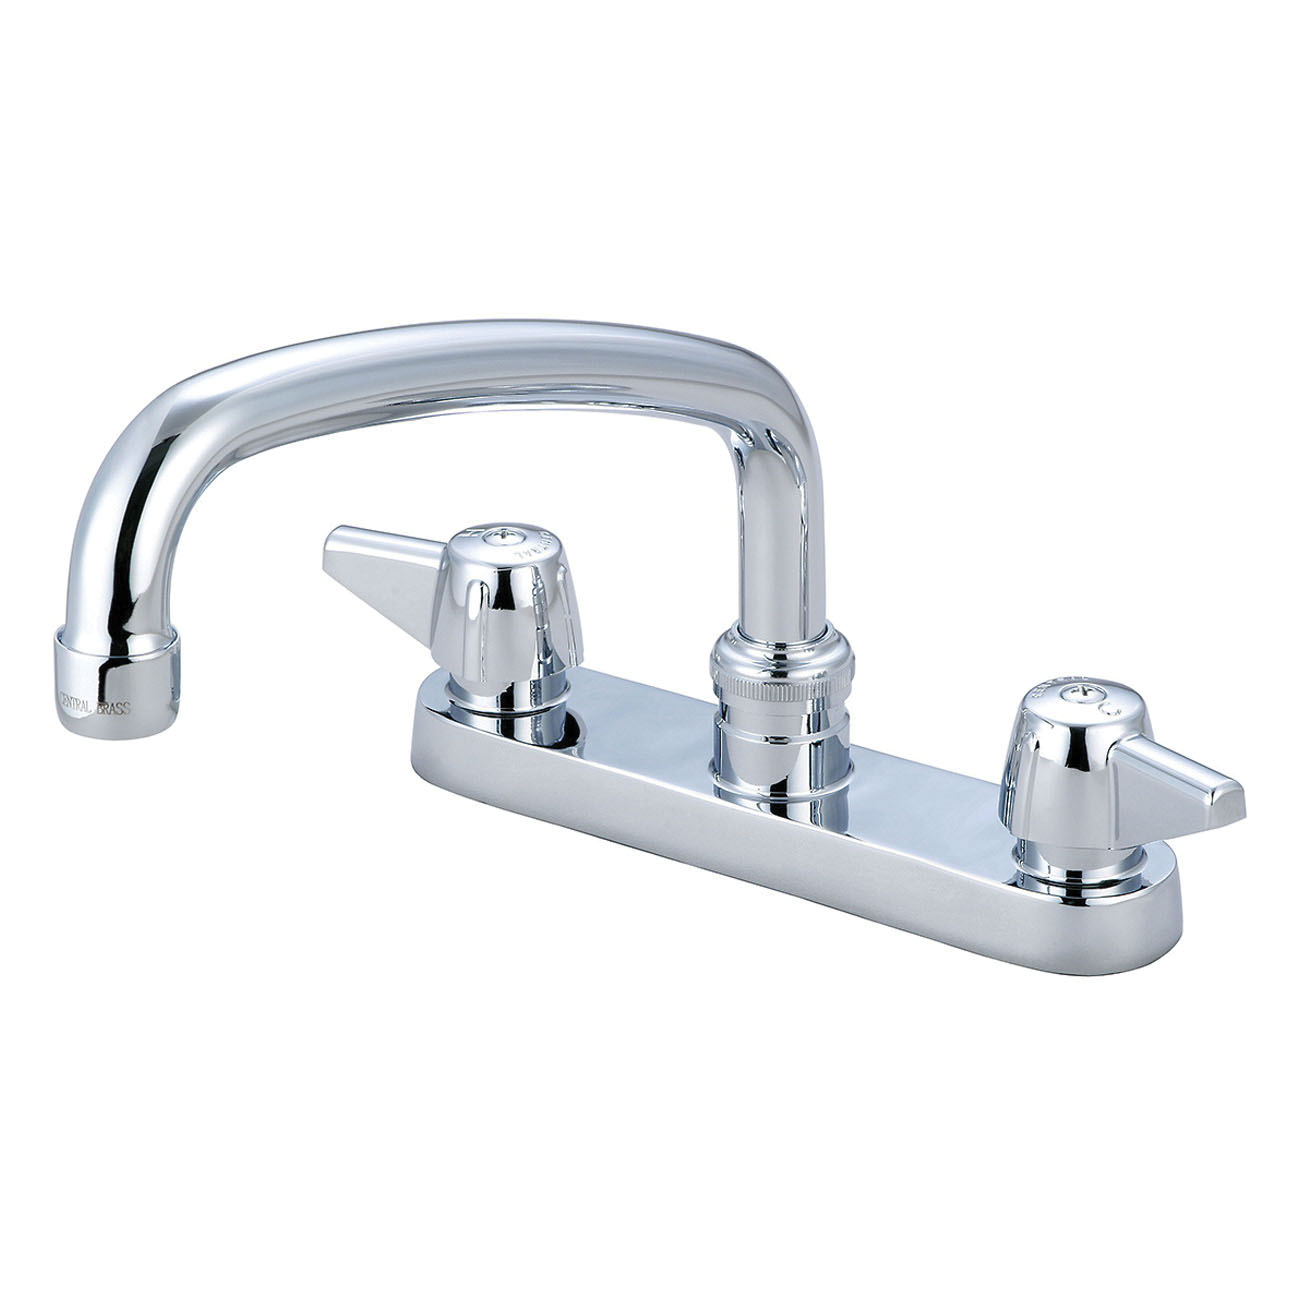 Central Brass 0125-A Kitchen Faucet, 1.5 gpm Flow Rate, 6 in Center, Swivel Tubular Spout, Polished Chrome, 2 Handles